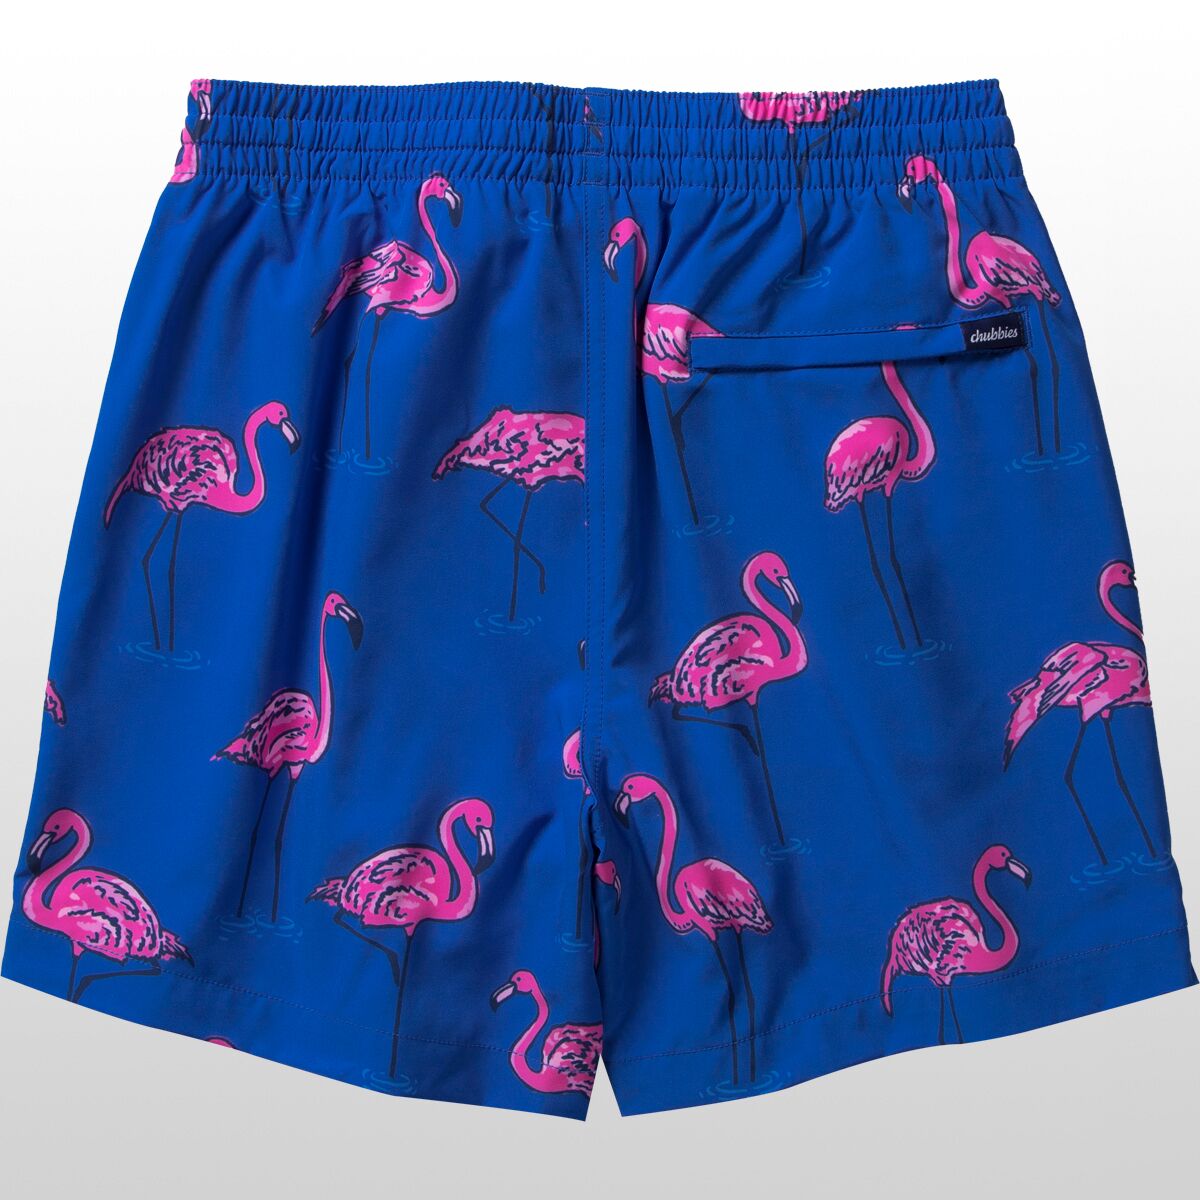 Chubbies The Pop Flock and Drop Its 5.5in Swim Trunk - Men's - Clothing